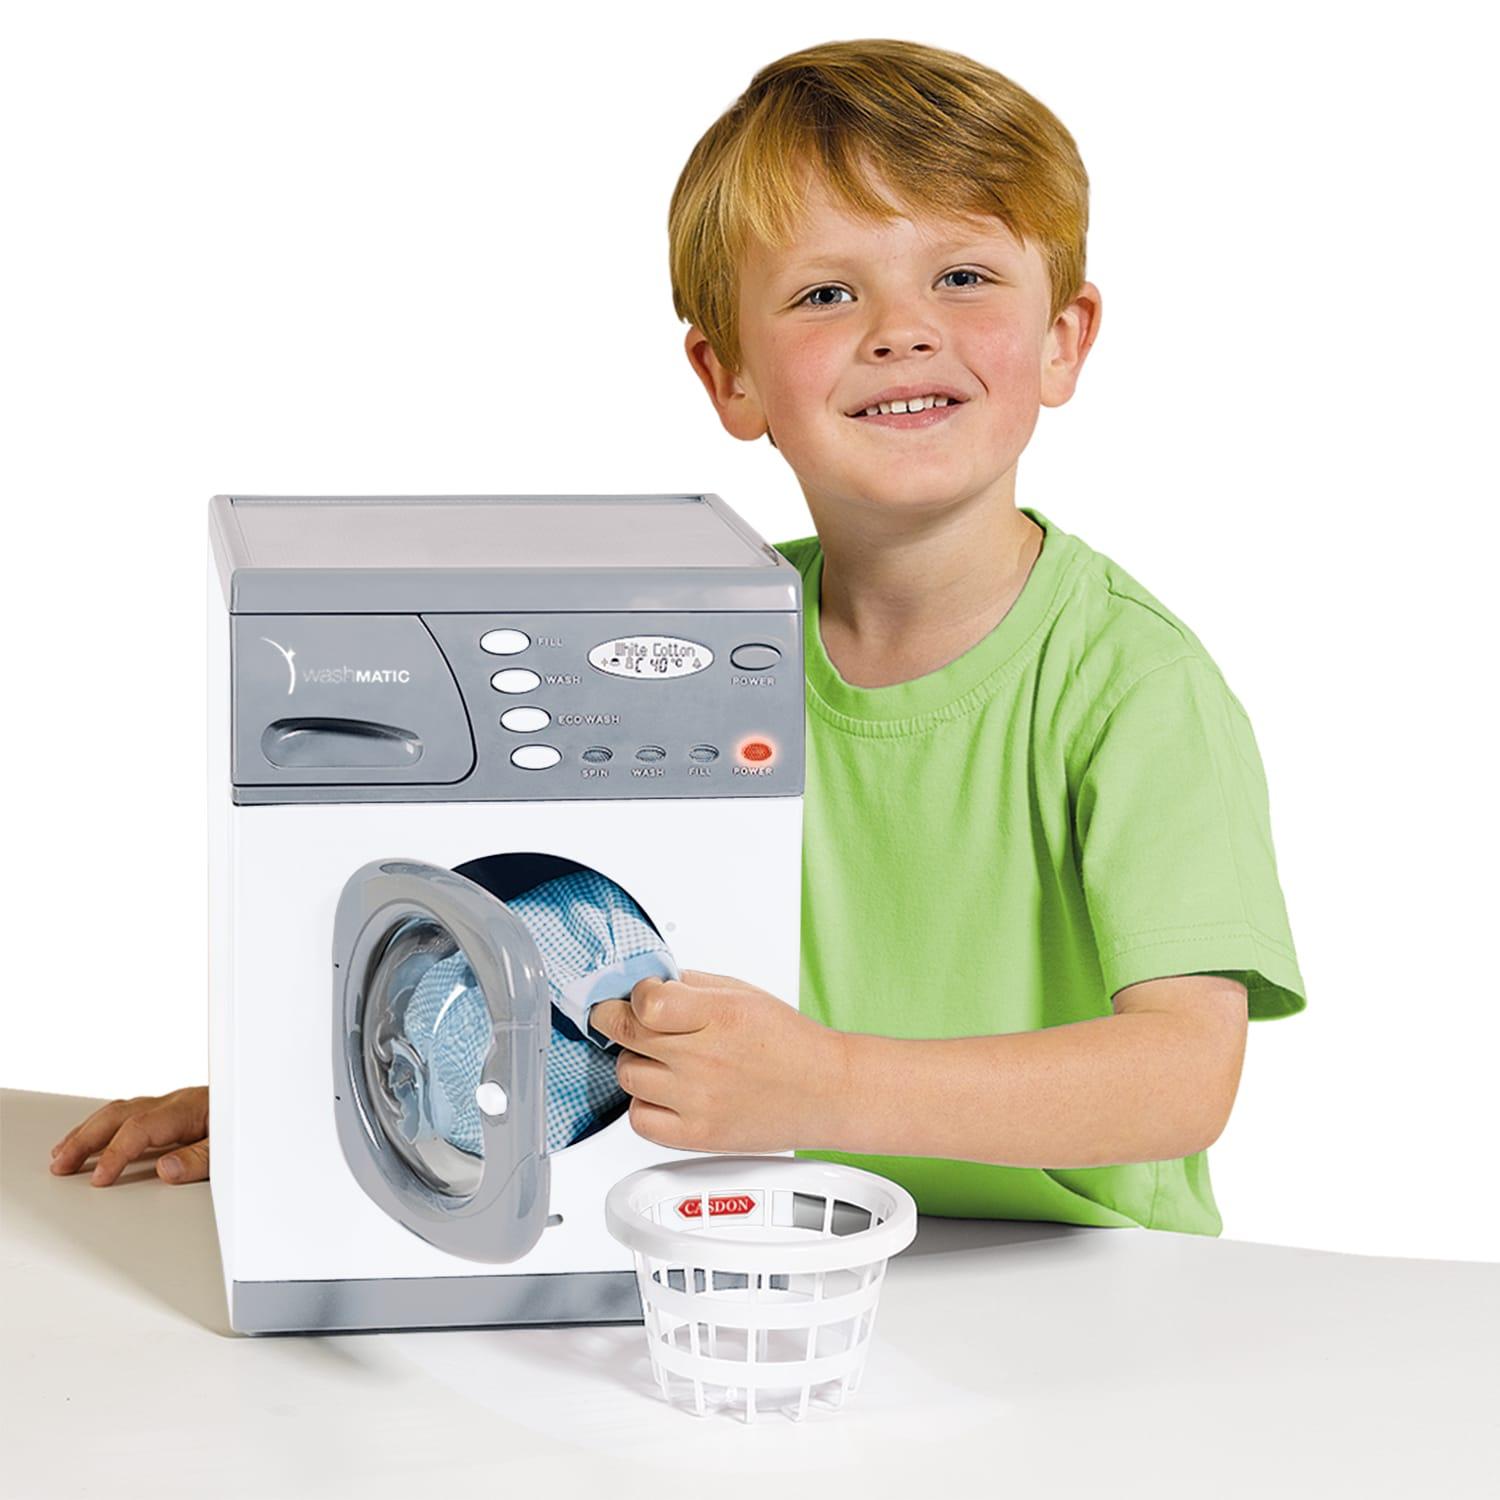 Casdon 476 Toy Hotpoint Electronic Washer for sale online 